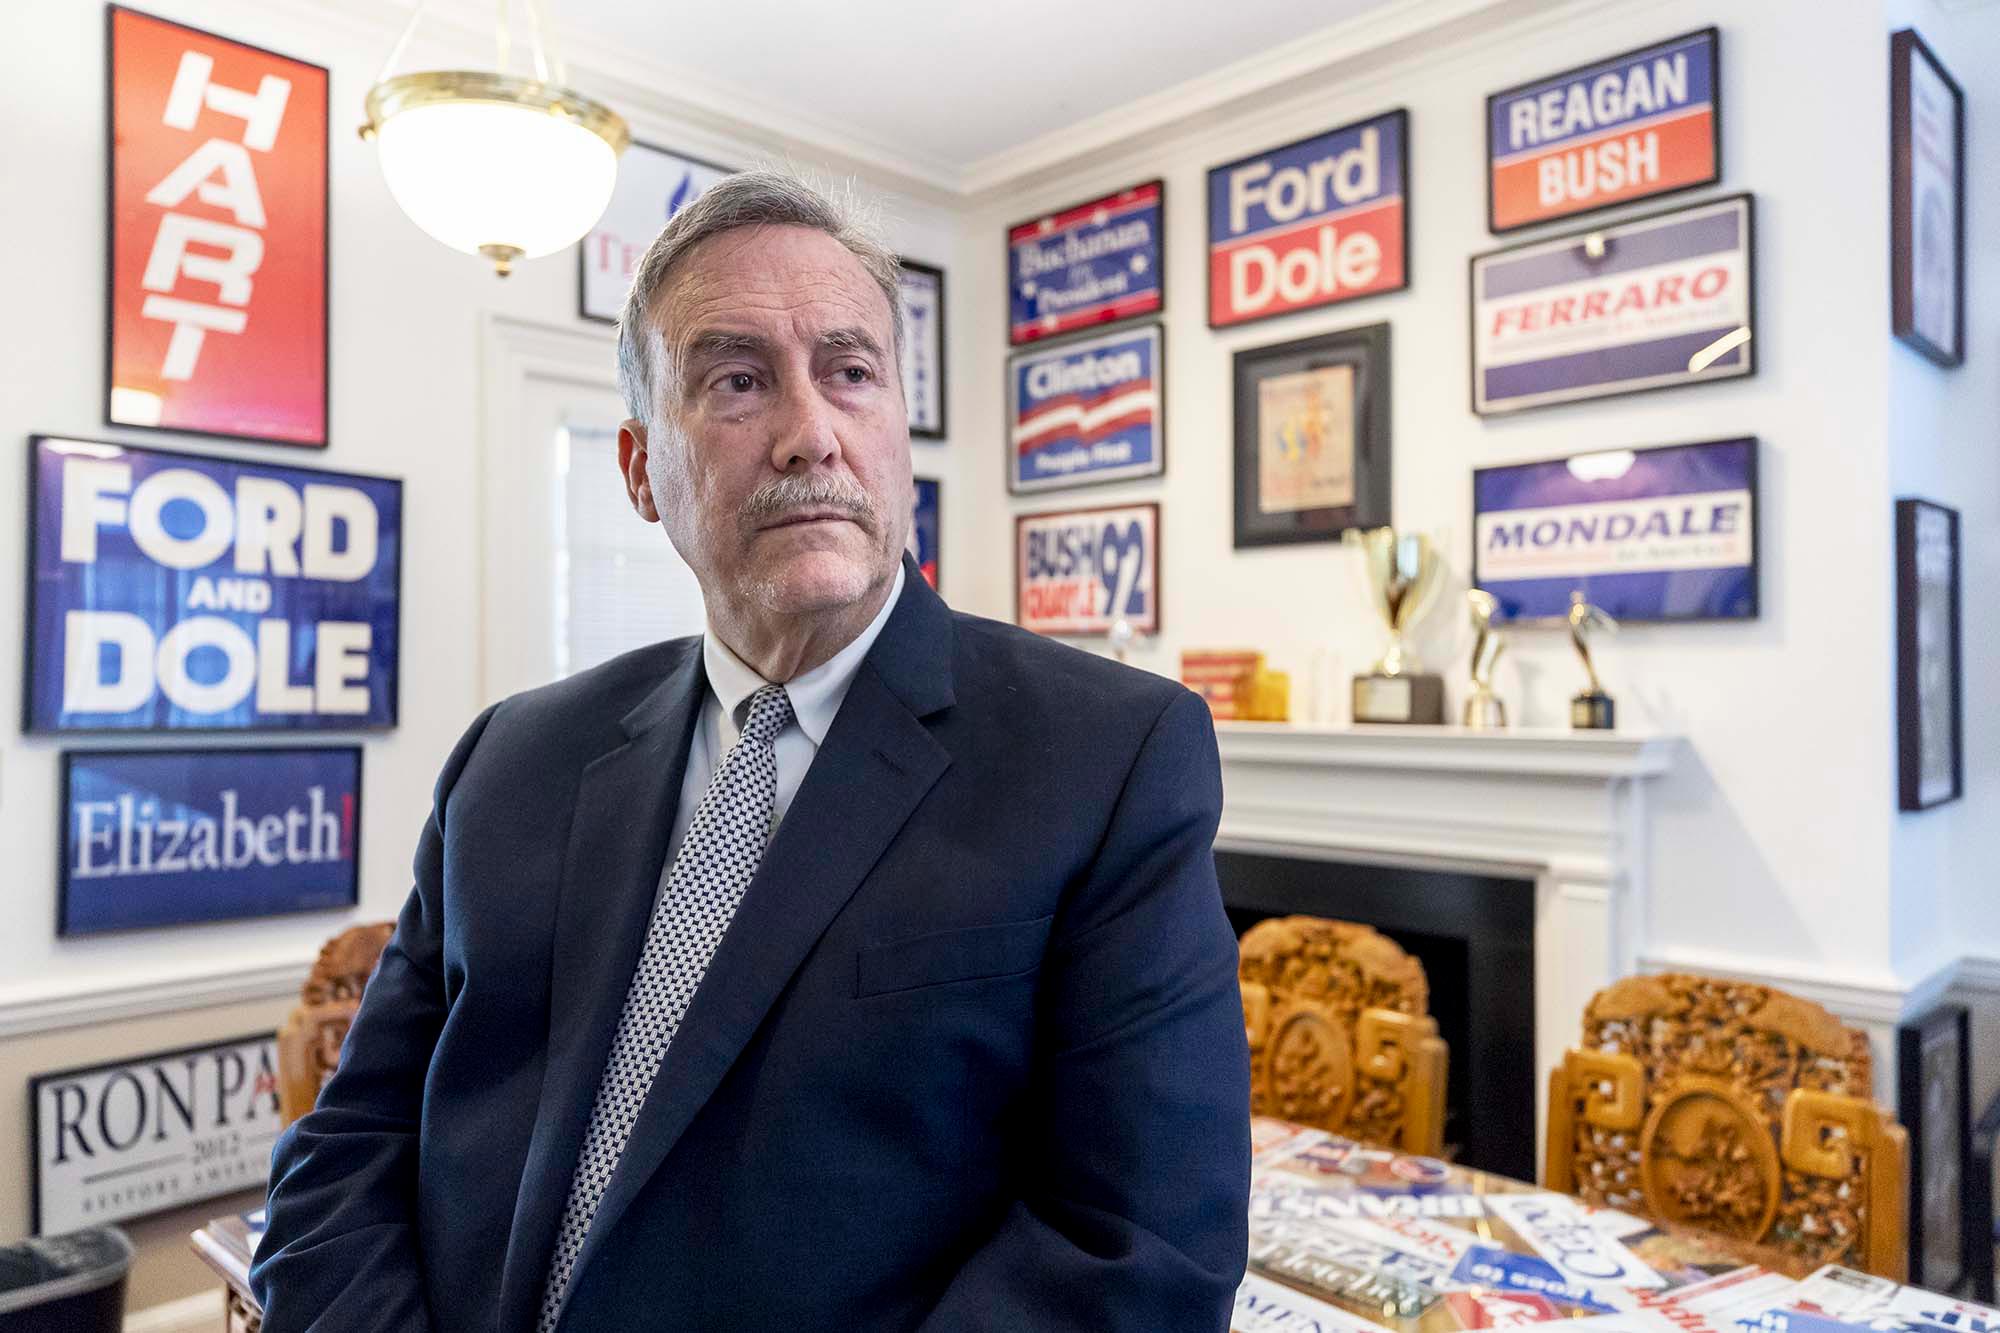 Larry Sabato leaning on table 